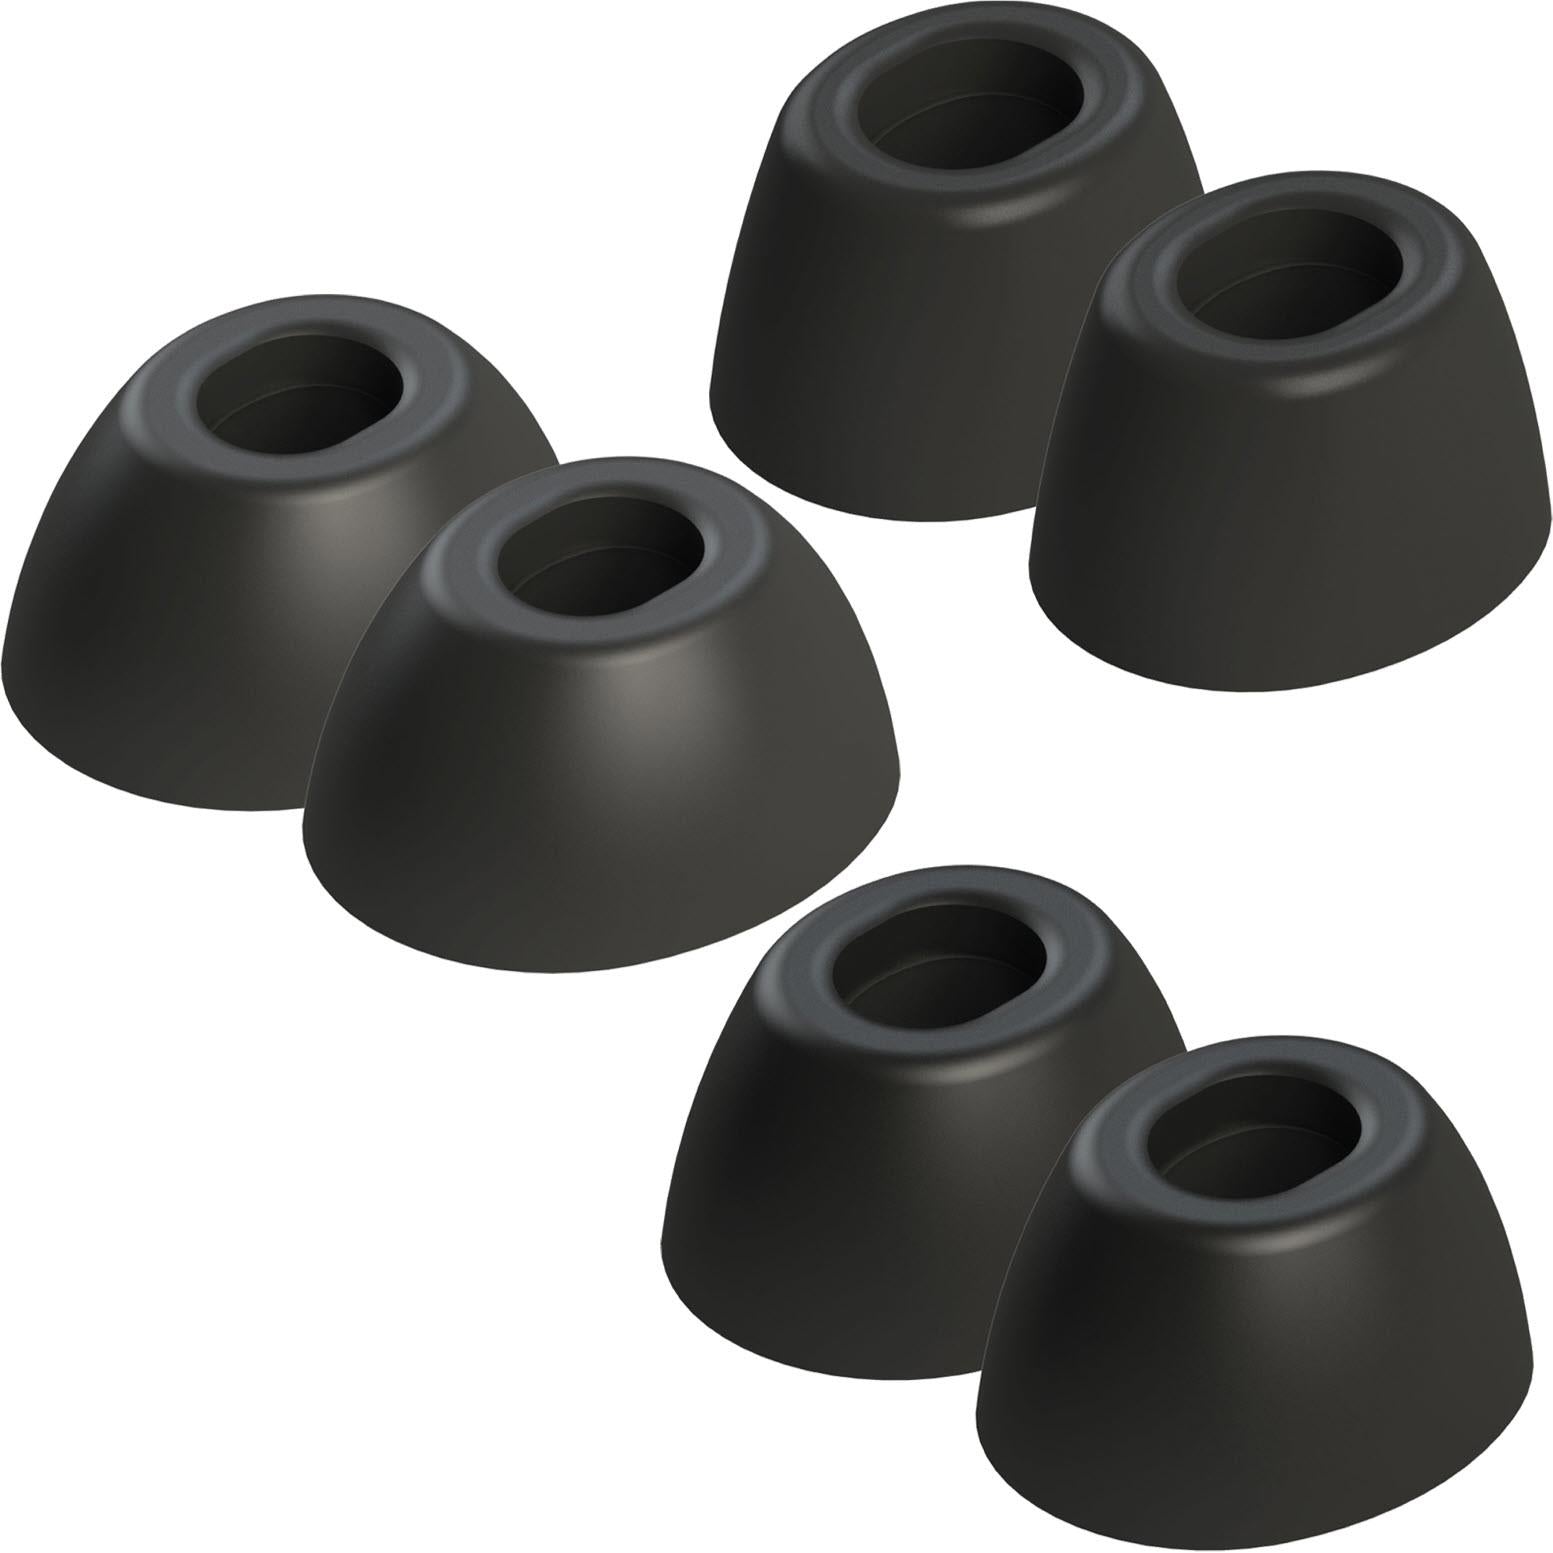 comply headphones ear tips for airpods pro (black) [assorted pack]